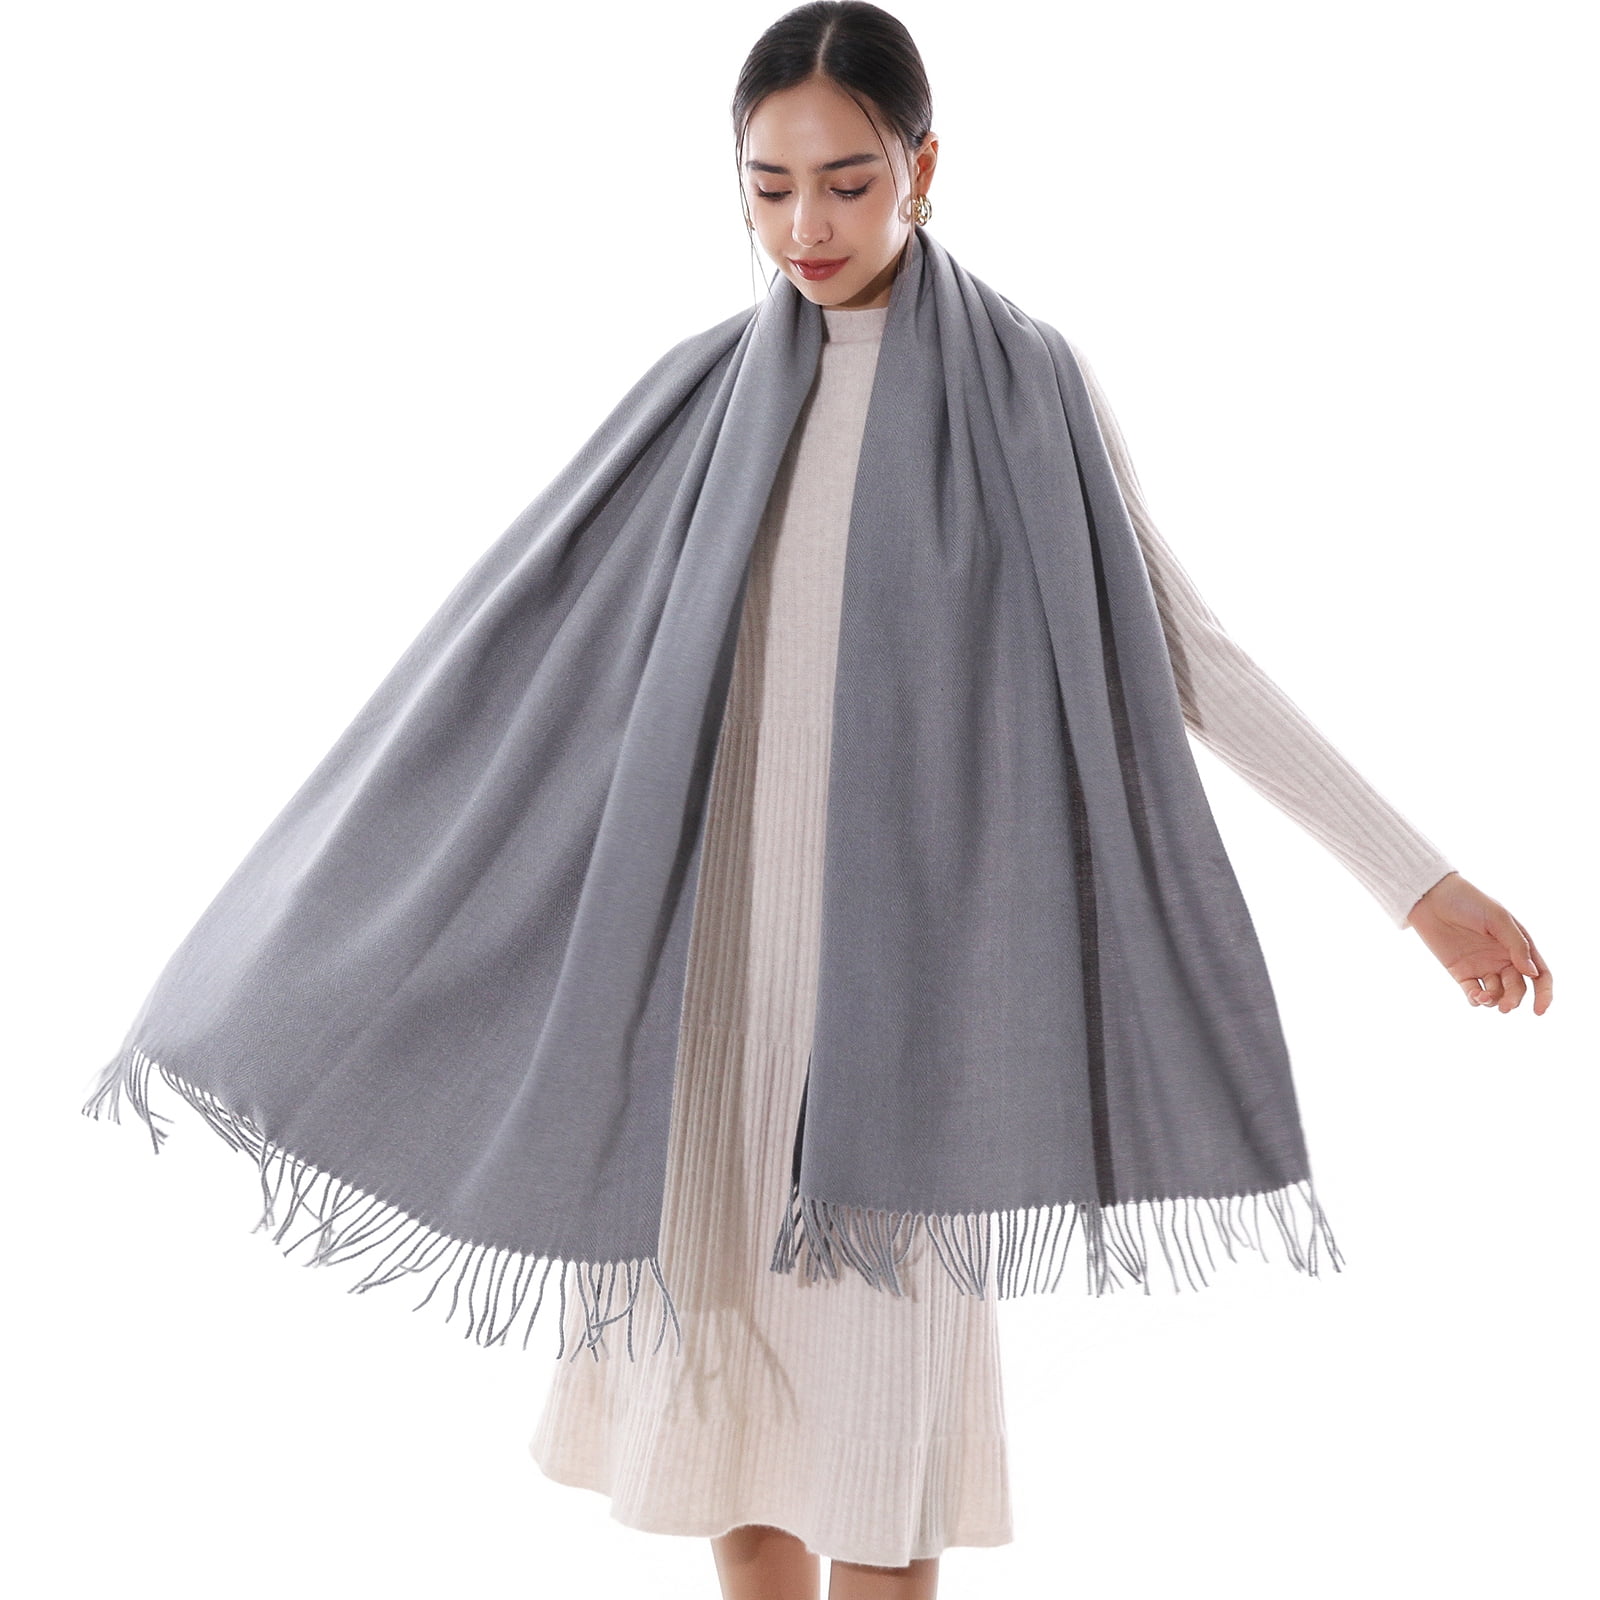 RIIQIICHY 100% Wool Scarf Pashmina Shawls and Wraps for Women Cashmere Warm  Winter More Thicker Soft Scarves